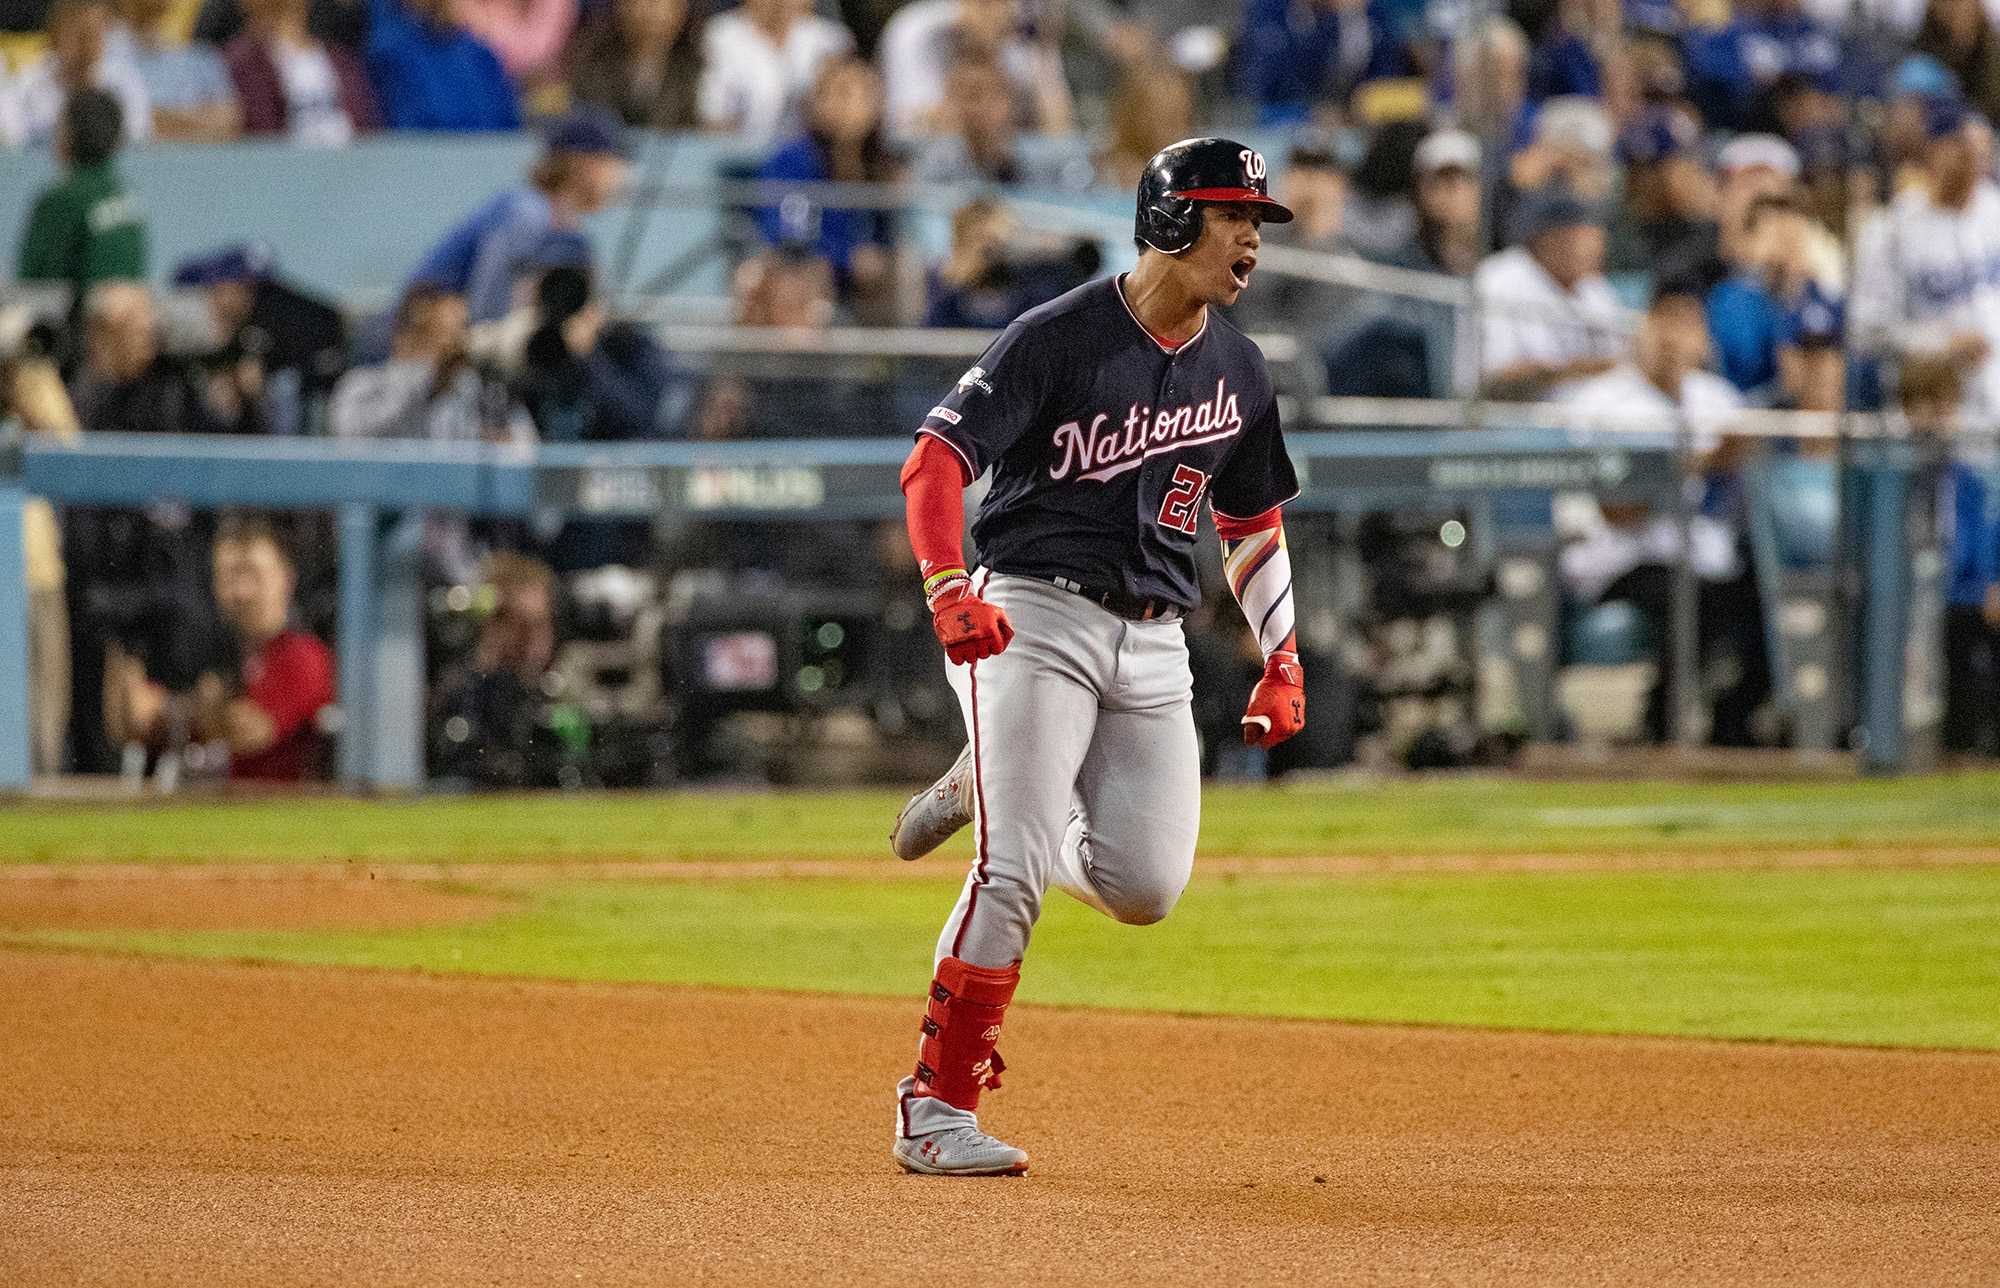 The Washington Nationals Juan Soto (22) celebrates as he runs the bases after hitting the game-tying home run against the Los Angeles Dodgers in the eighth inning during Game 5 of the National League Division Series at Dodger Stadium in Los Angeles on Wednesday, Oct. 9, 2019. (Gina Ferazzi/Los Angeles Times/TNS)